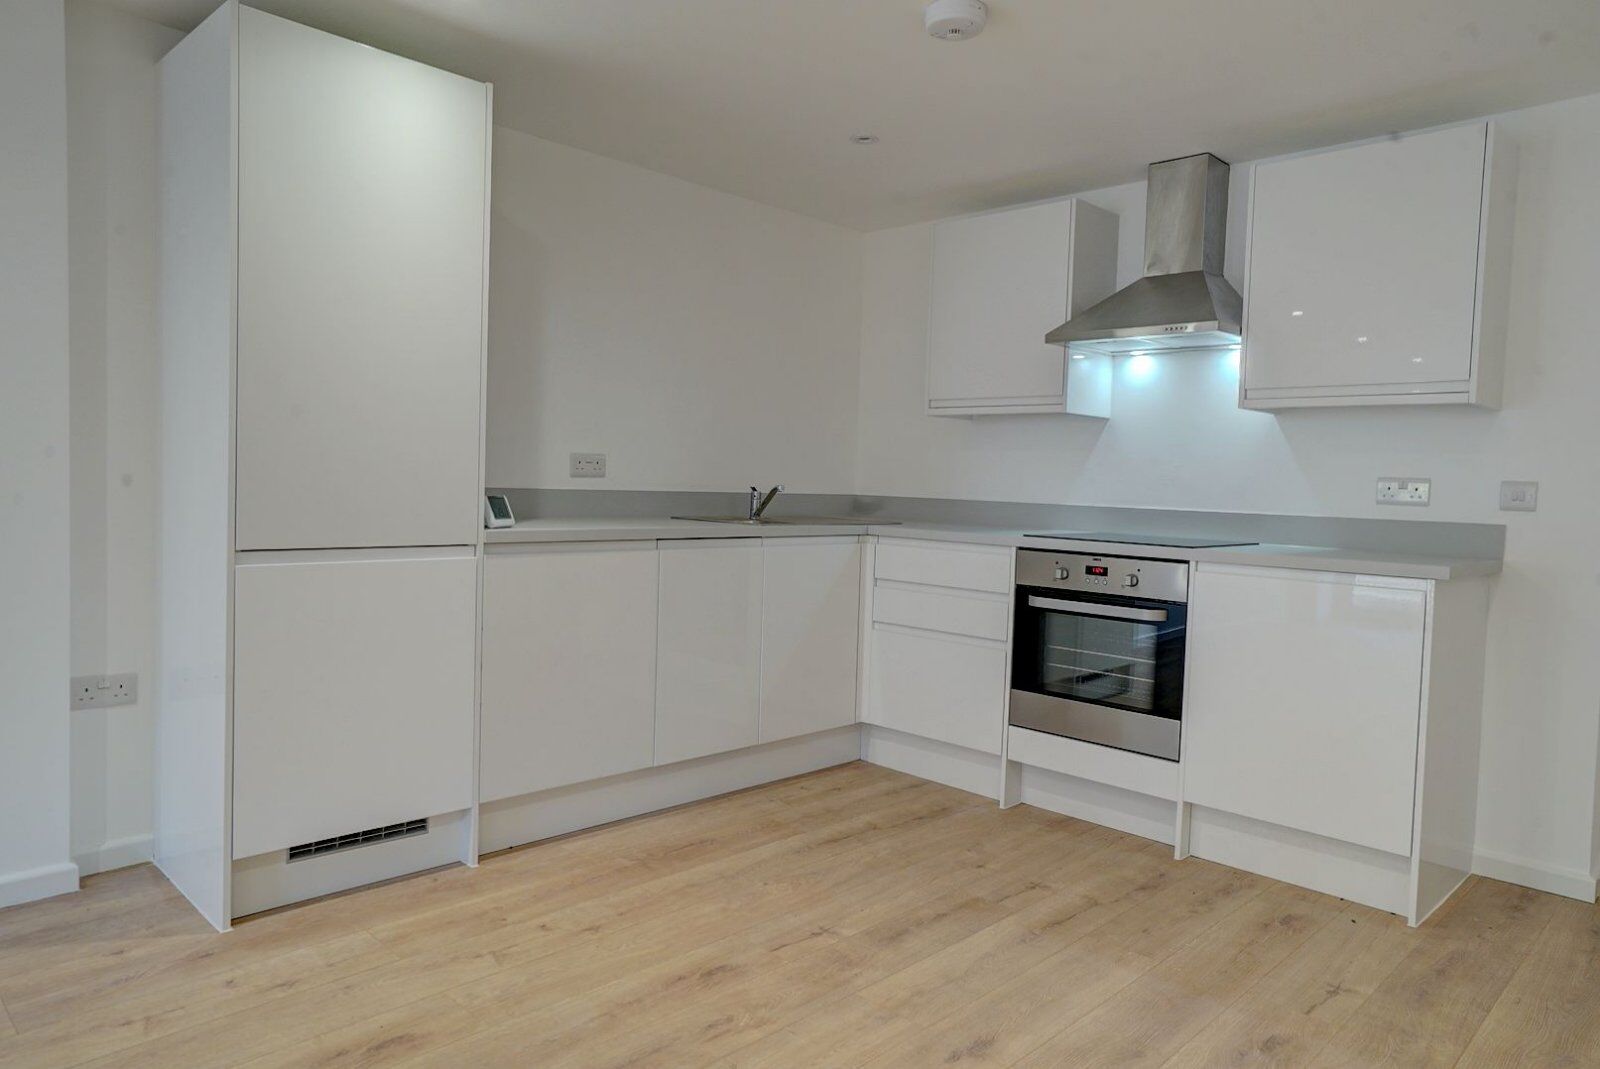 1 bedroom  flat for sale Wycombe Lane, Wooburn Green, HP10, main image